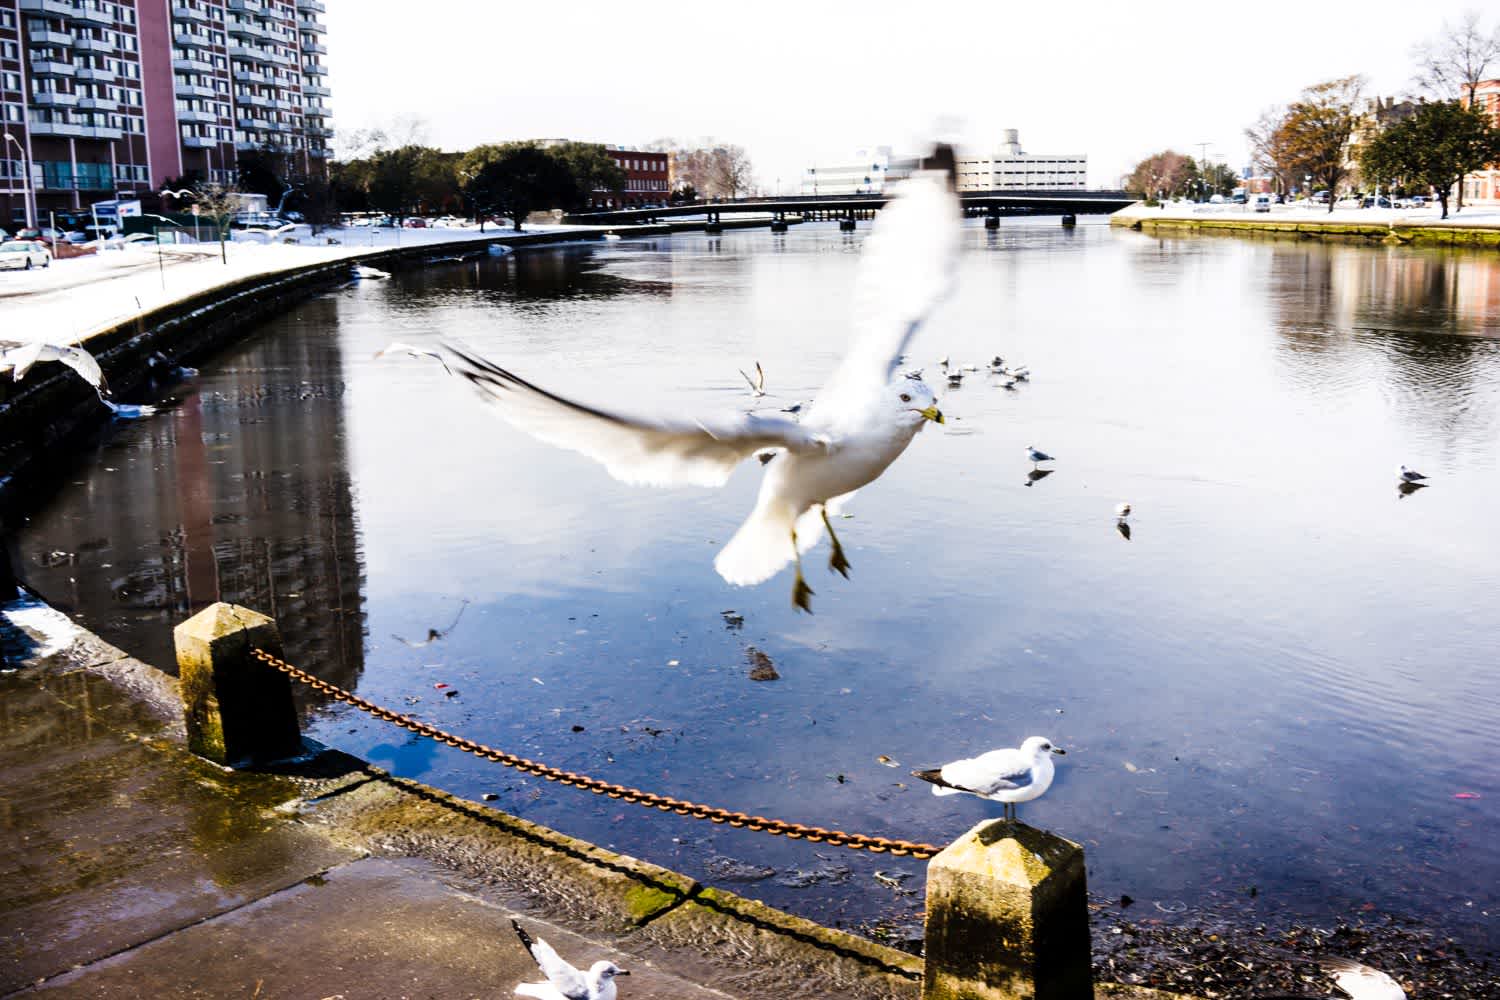 Photograph taken of a seagull mid flight along a river in Norfolk, Virginia. Photograph by artist Ben Boshart. Exhibited in Waterways at Virginia MOCA Satellite Gallery.